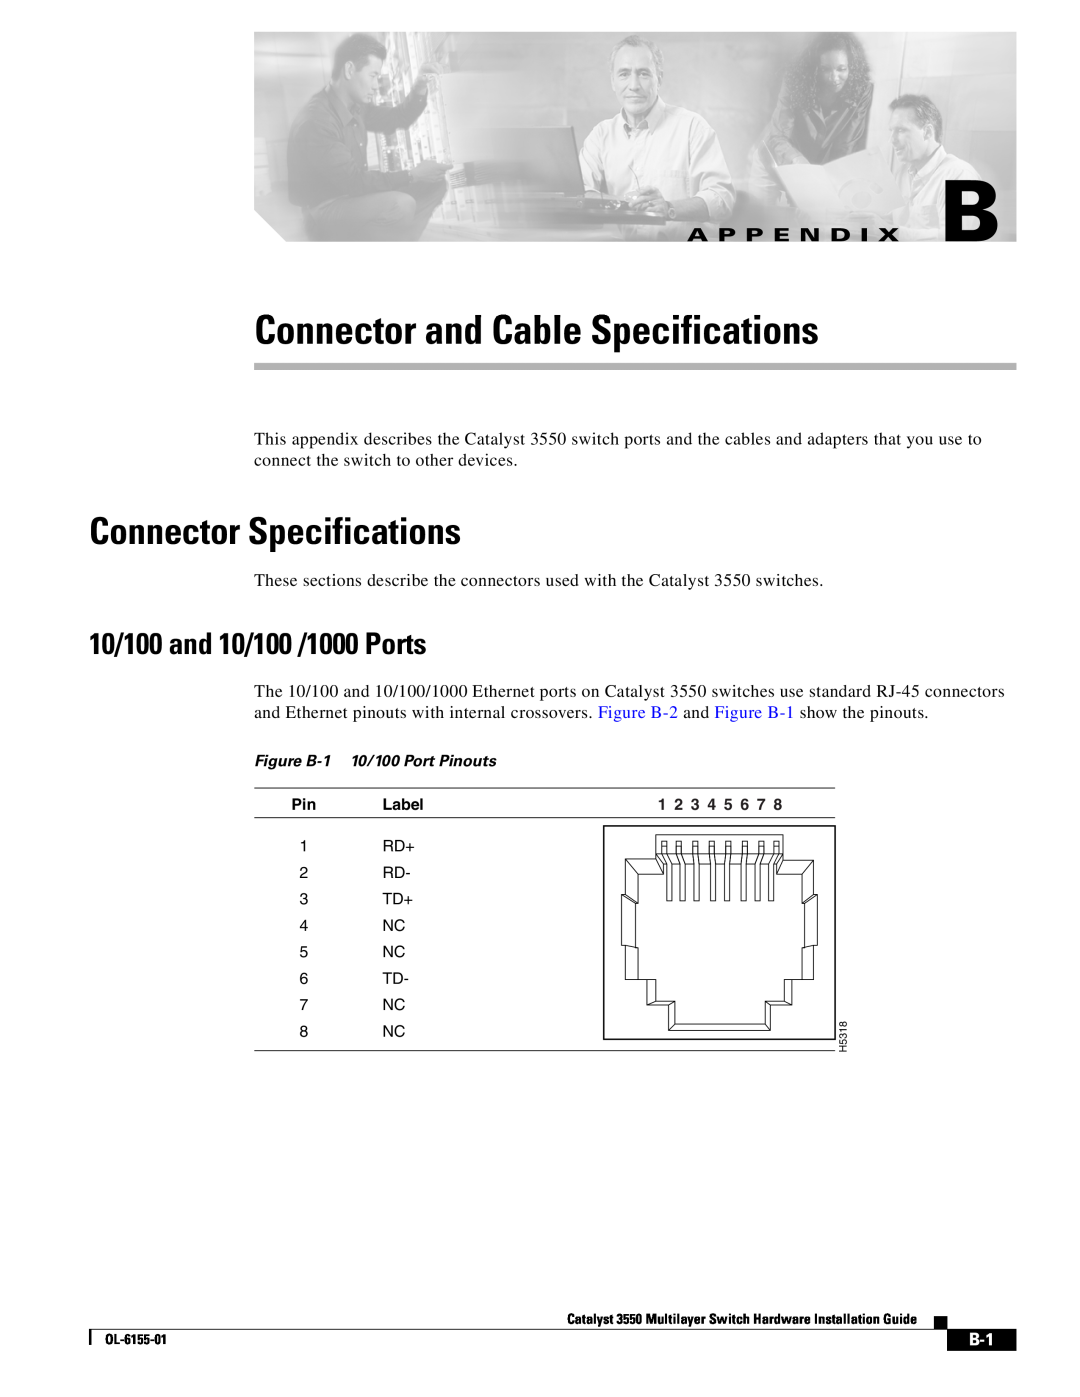 Cisco Systems 3550 manual Connector and Cable Specifications, Connector Specifications, 10/100 and 10/100 /1000 Ports 